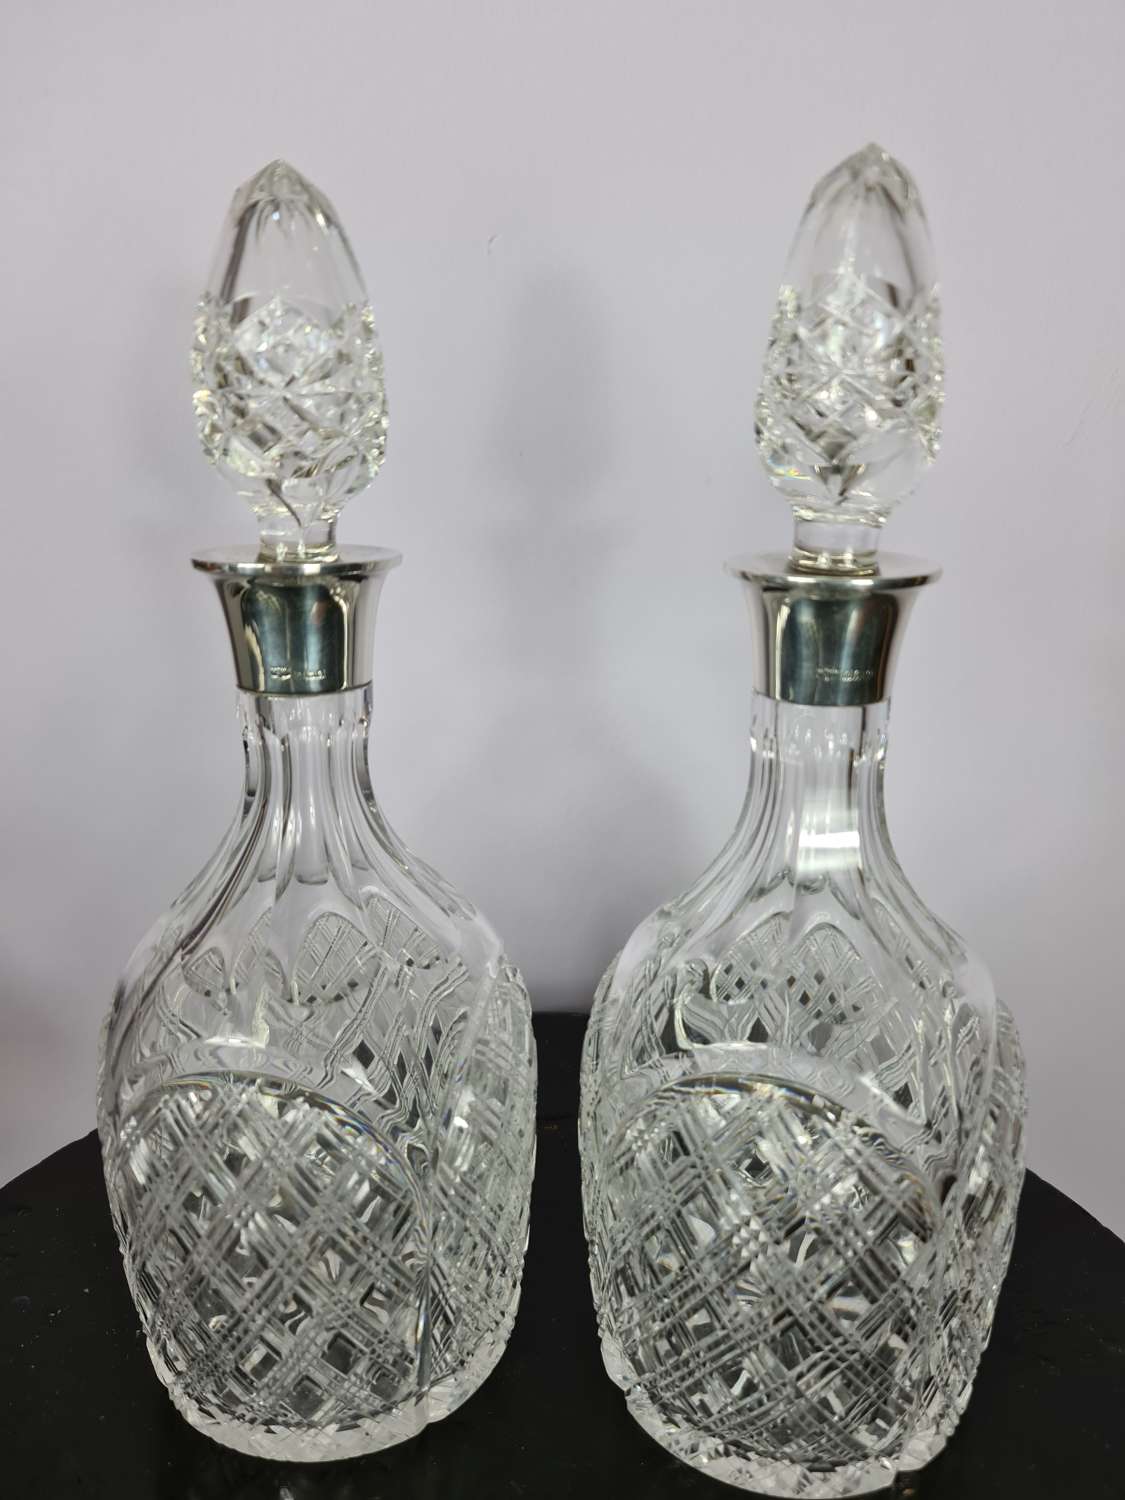 Elegant pair of Silver collared Decanters by Mappin & Webb